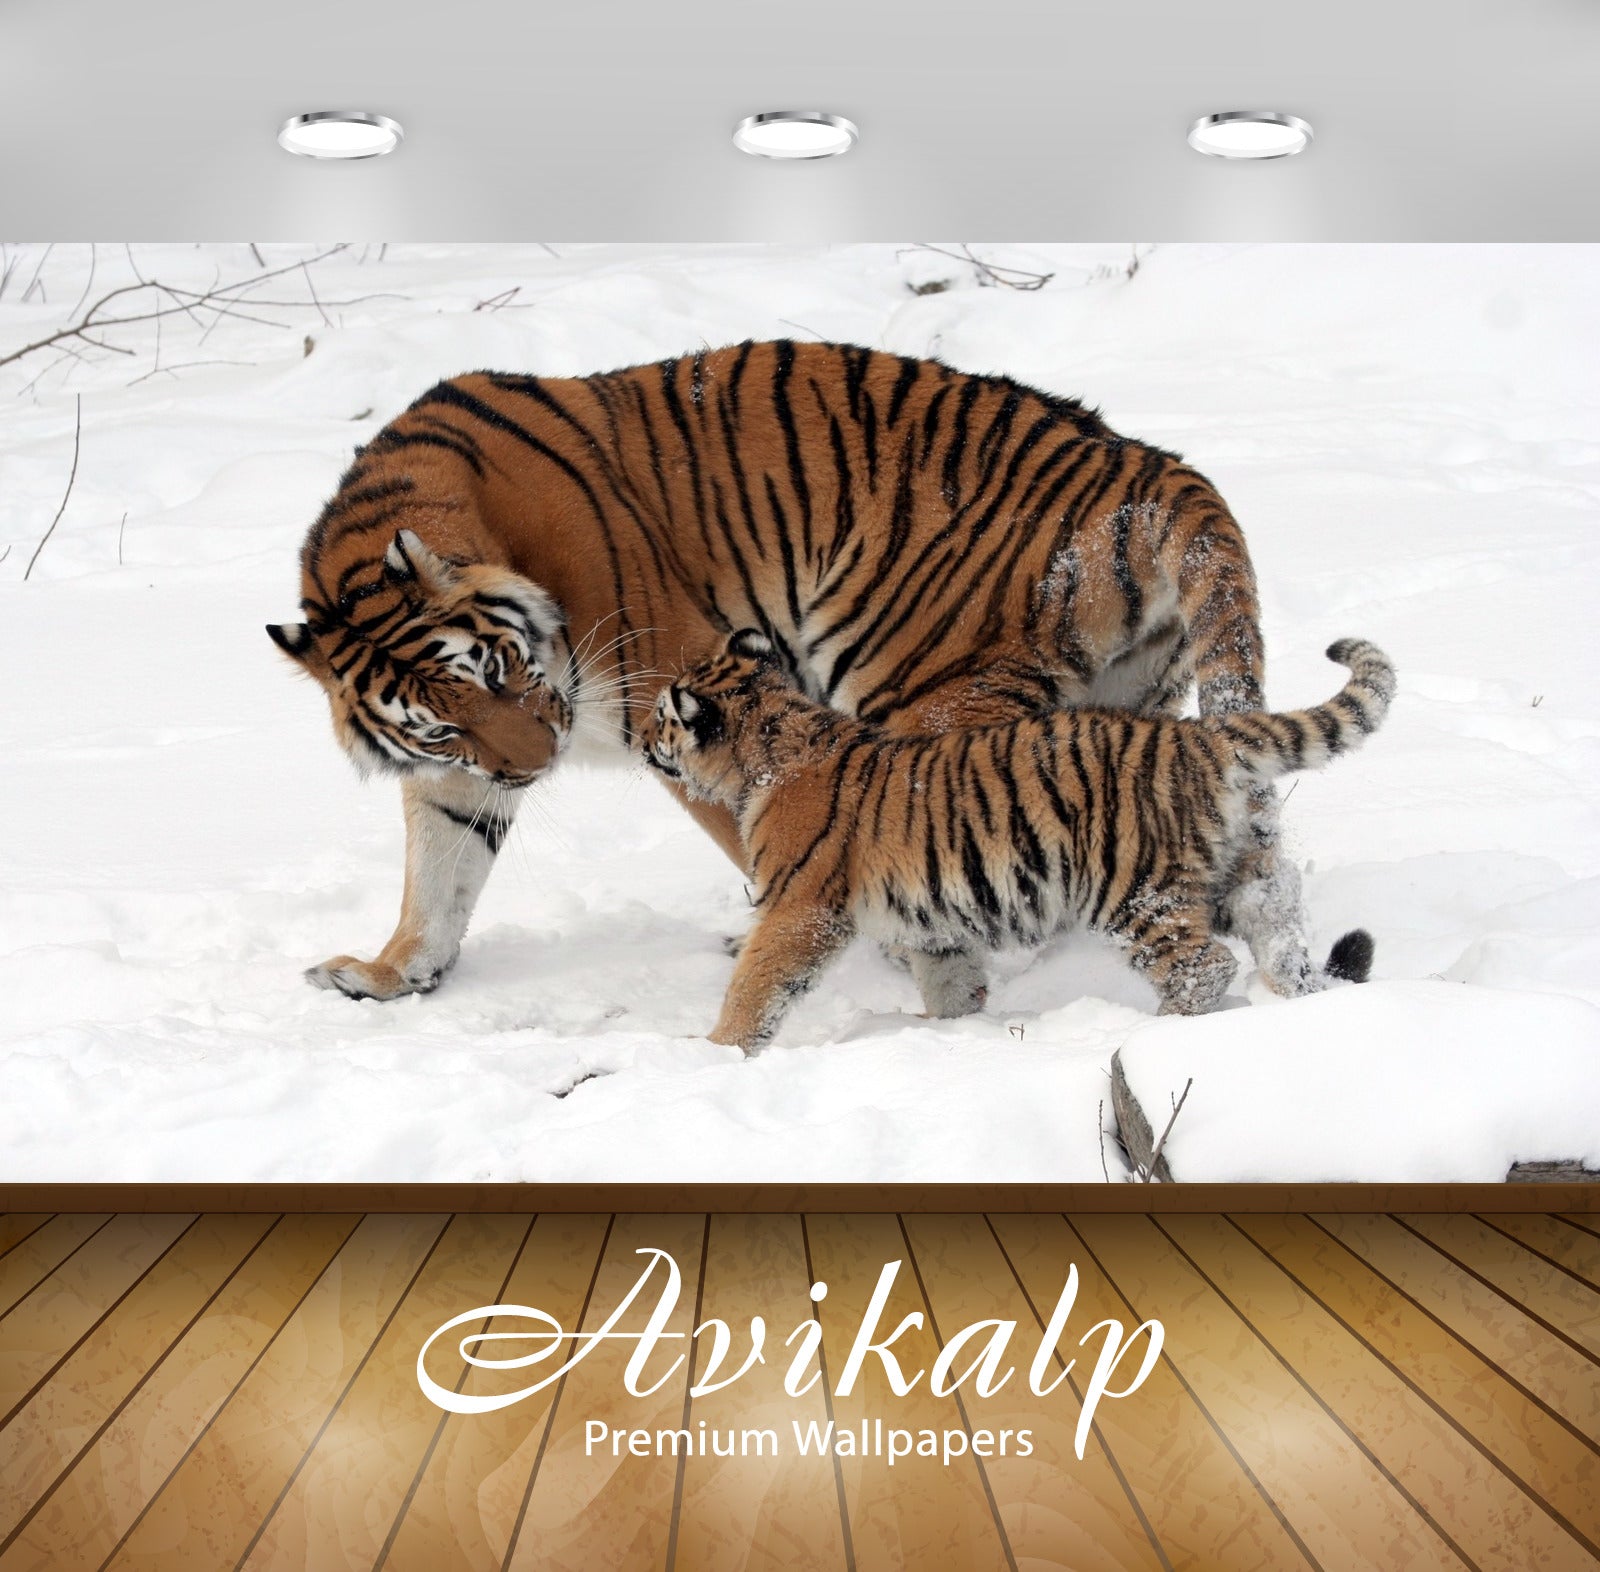 Avikalp Exclusive Awi1952 Siberian Tiger With Cubs Full HD Wallpapers for Living room, Hall, Kids Ro